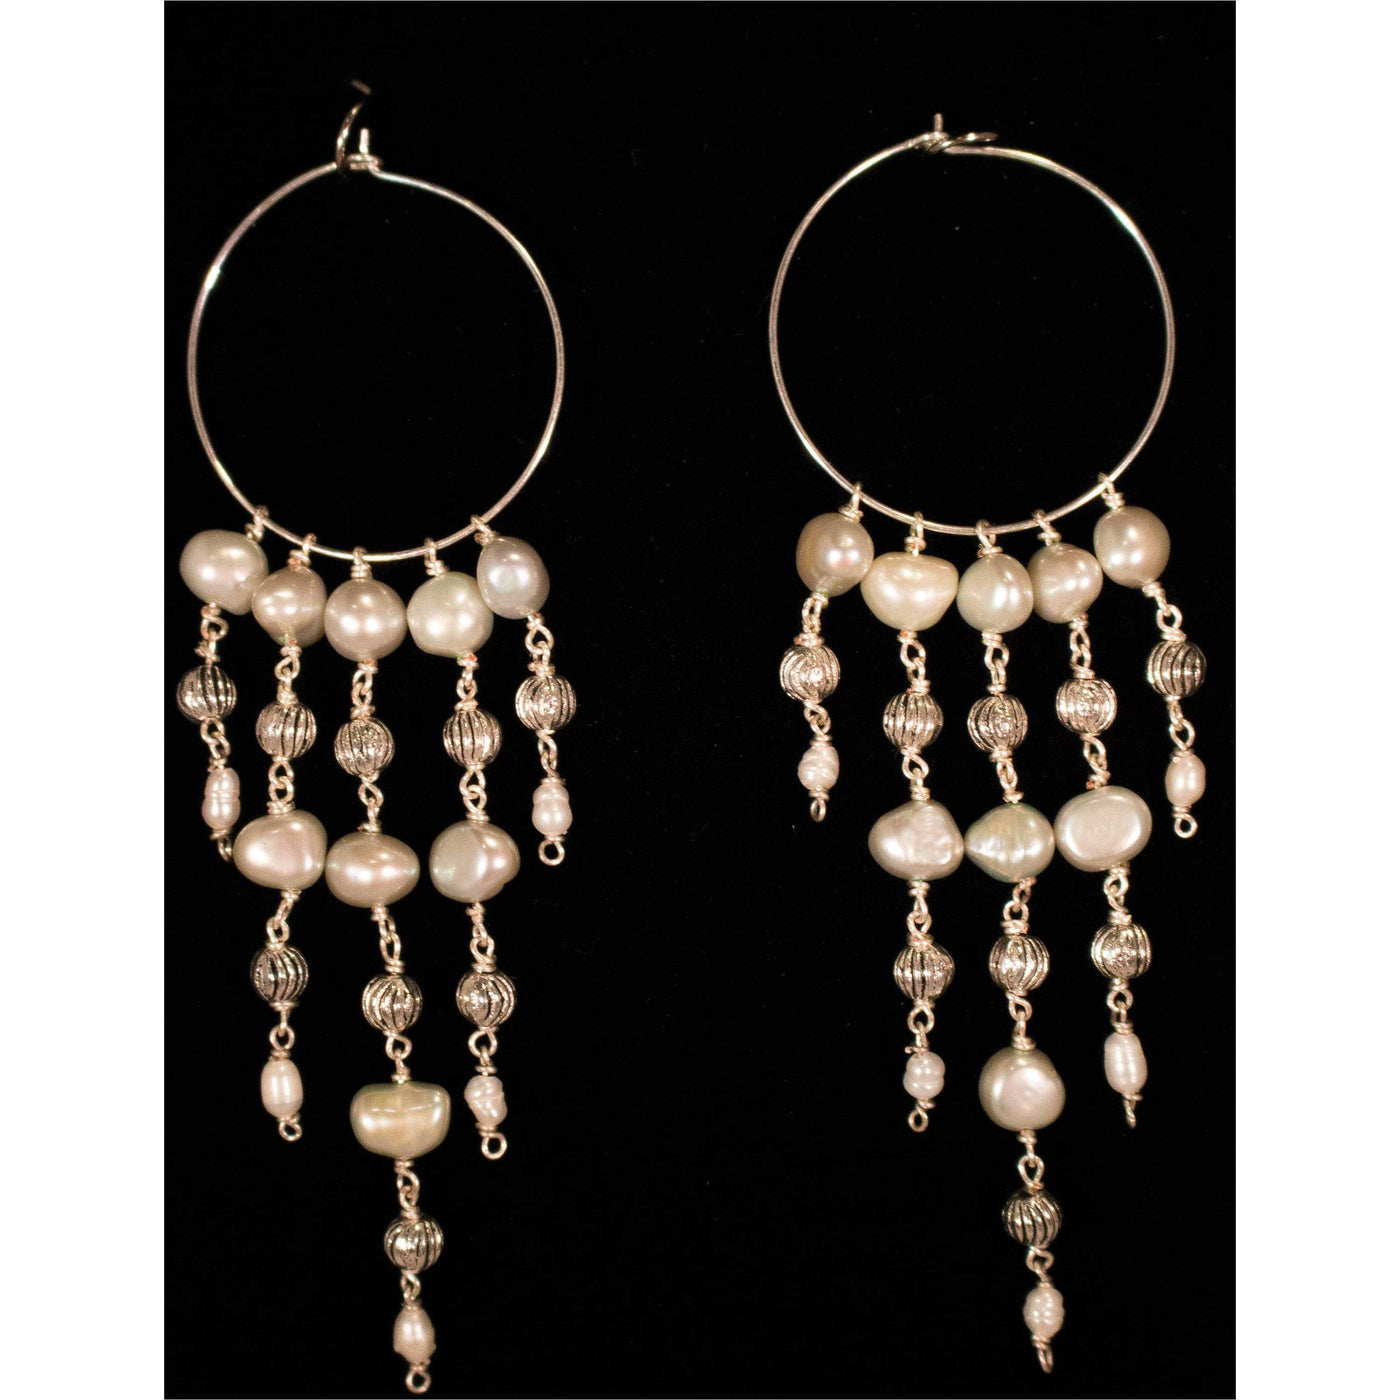 Waterfall pearl and silver earrings - LB Designs